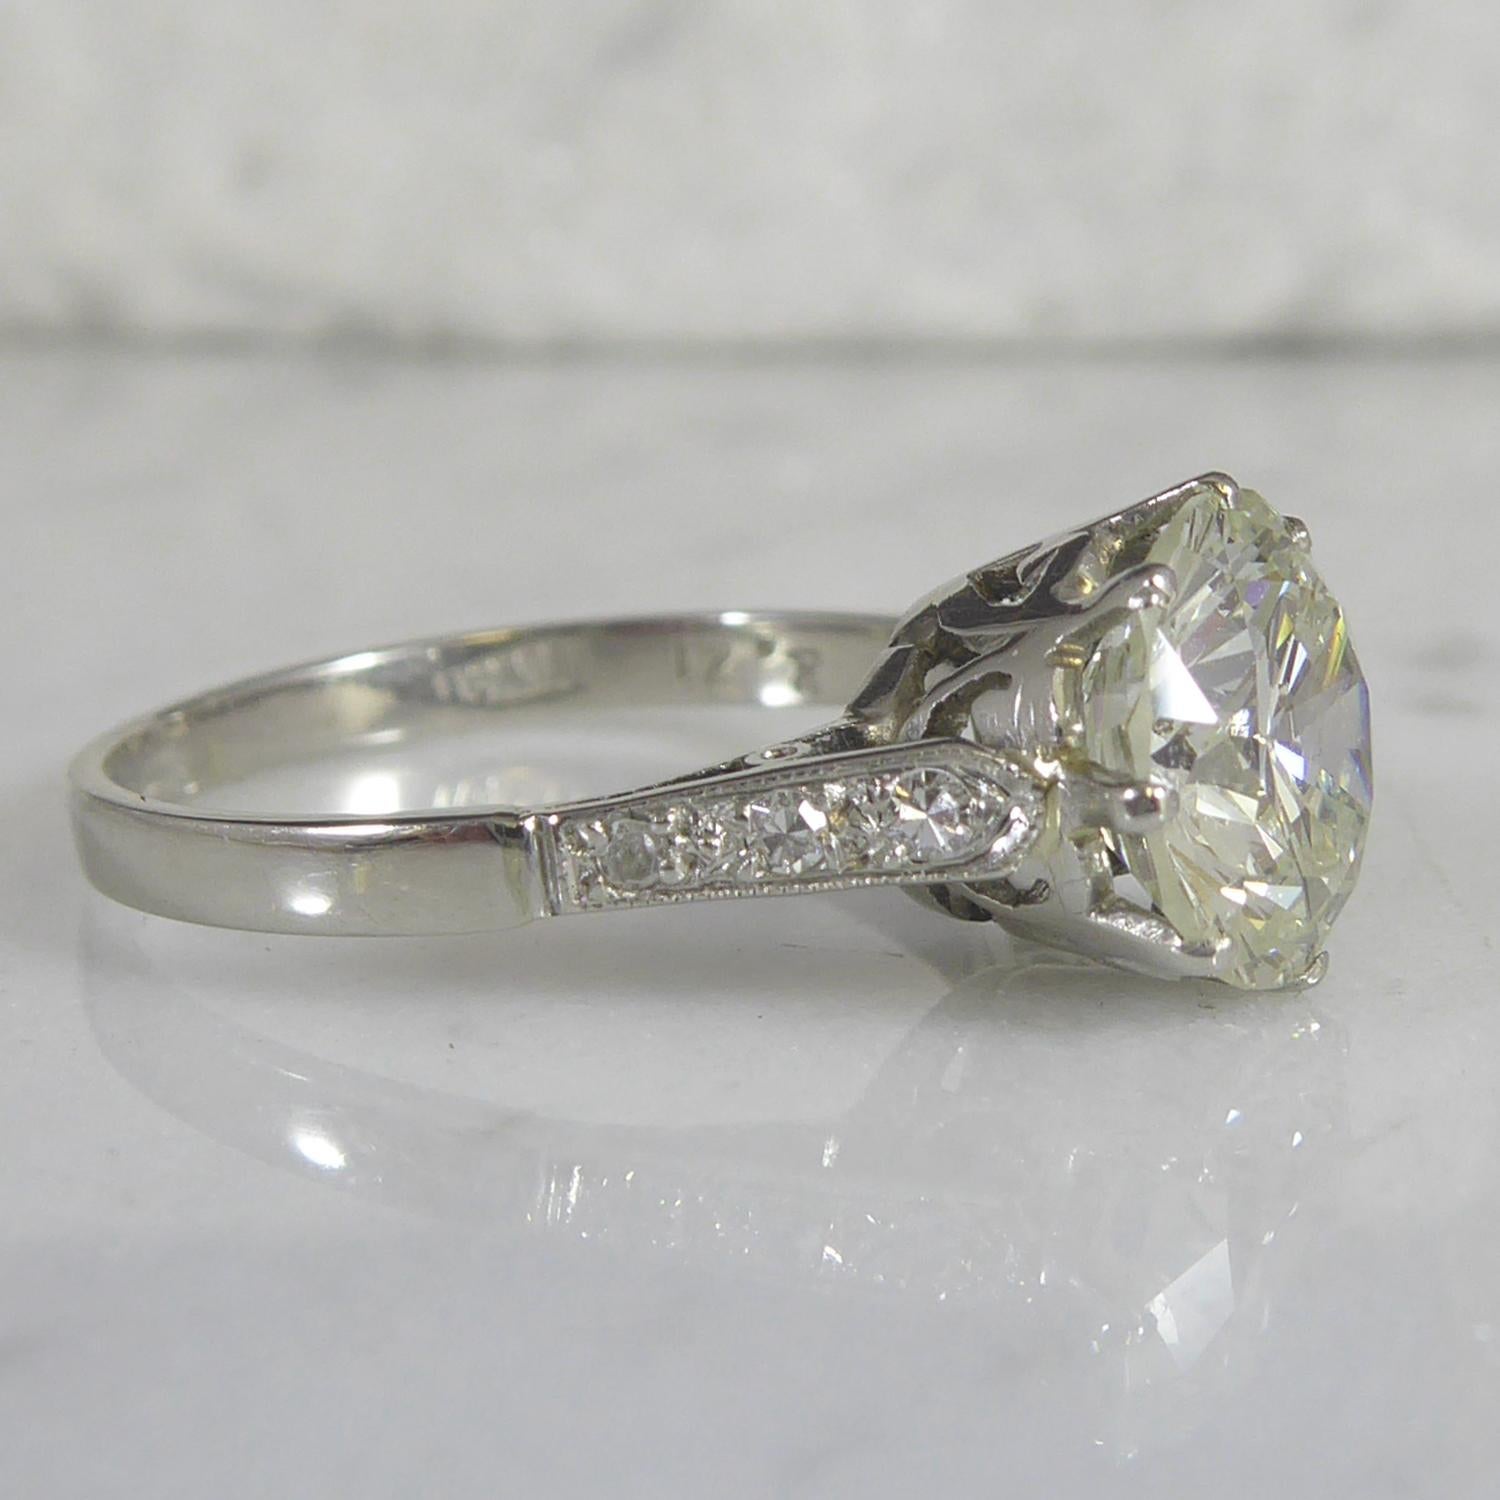 A vintage solitaire diamond engagement or dress ring set with an early round brilliant cut diamond measuring approx. 8.23mm x 8.32mm x 4.95mm deep.  Estimated diamond weight 2.21ct, assessed clarity VS1, assessed colour K/L.  Claw setting in white. 